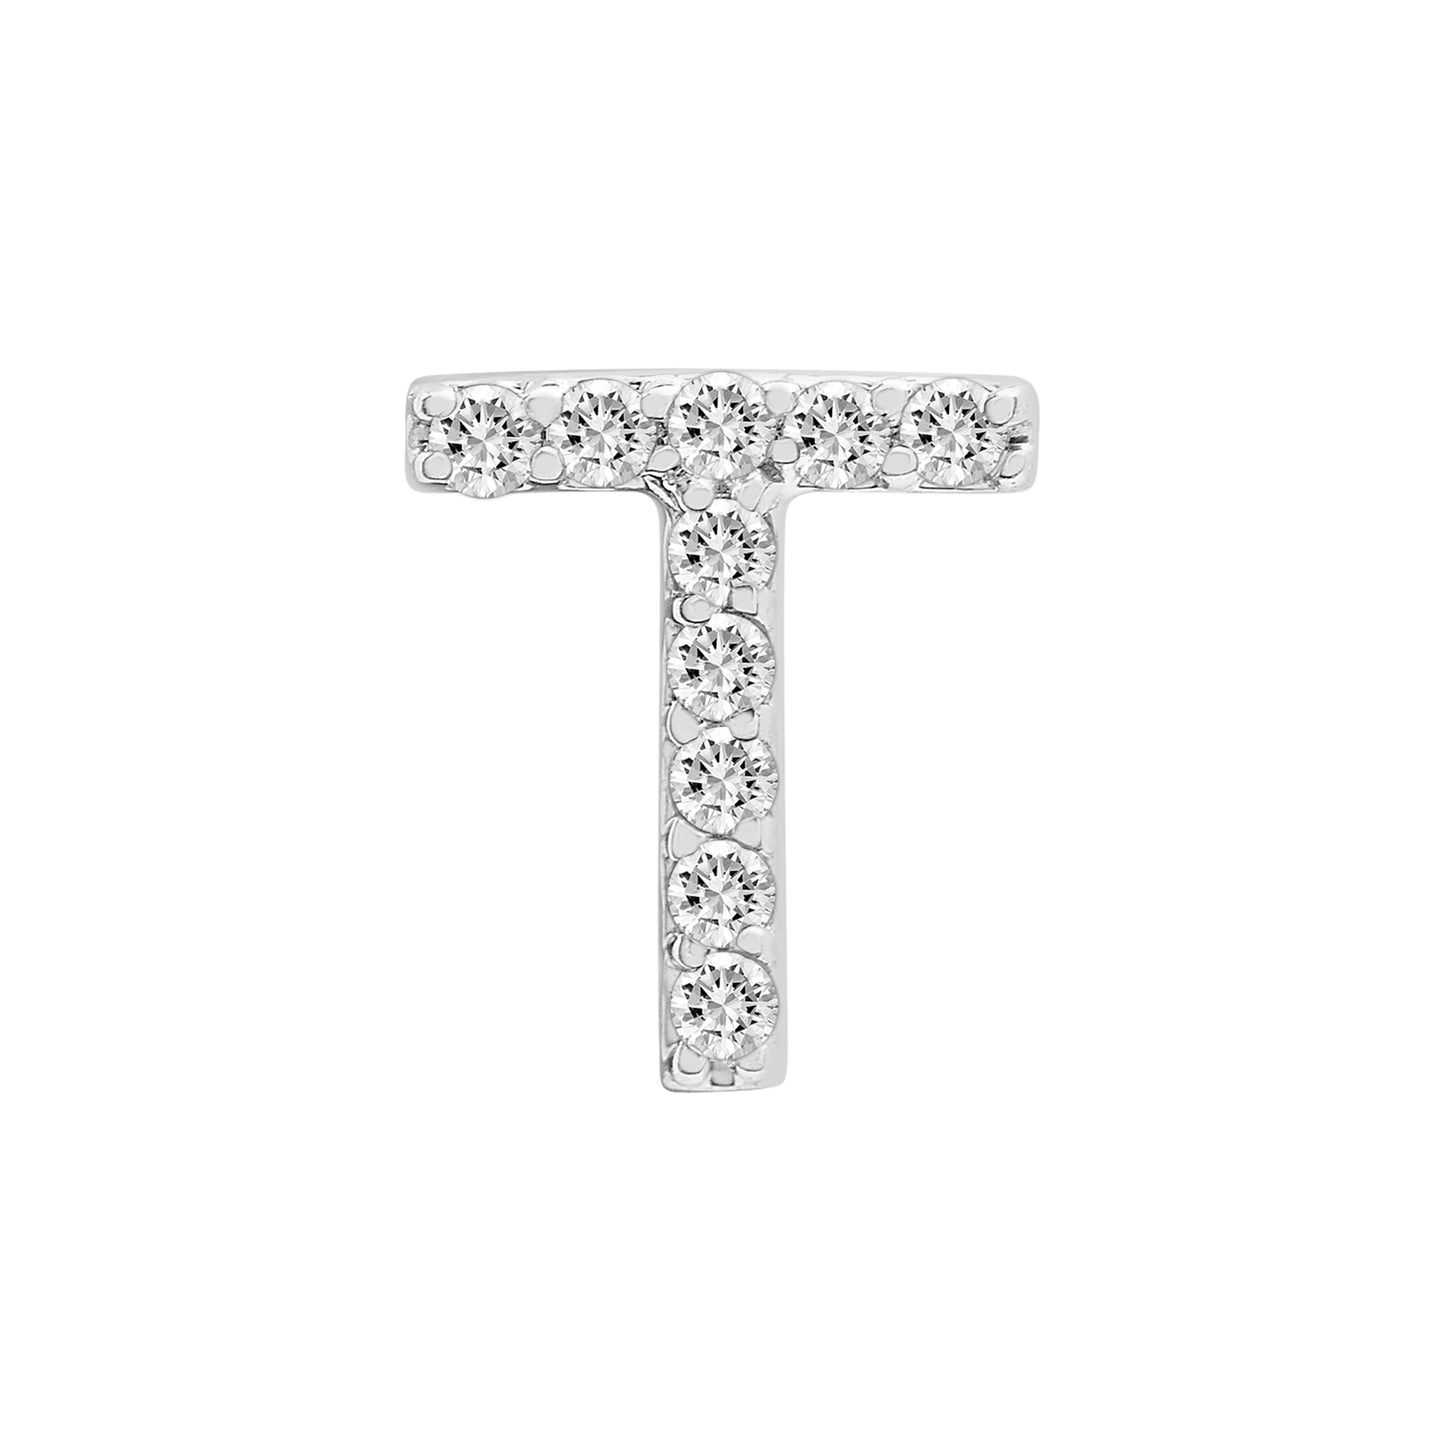 Single Initial Diamond Stud - T in White Gold